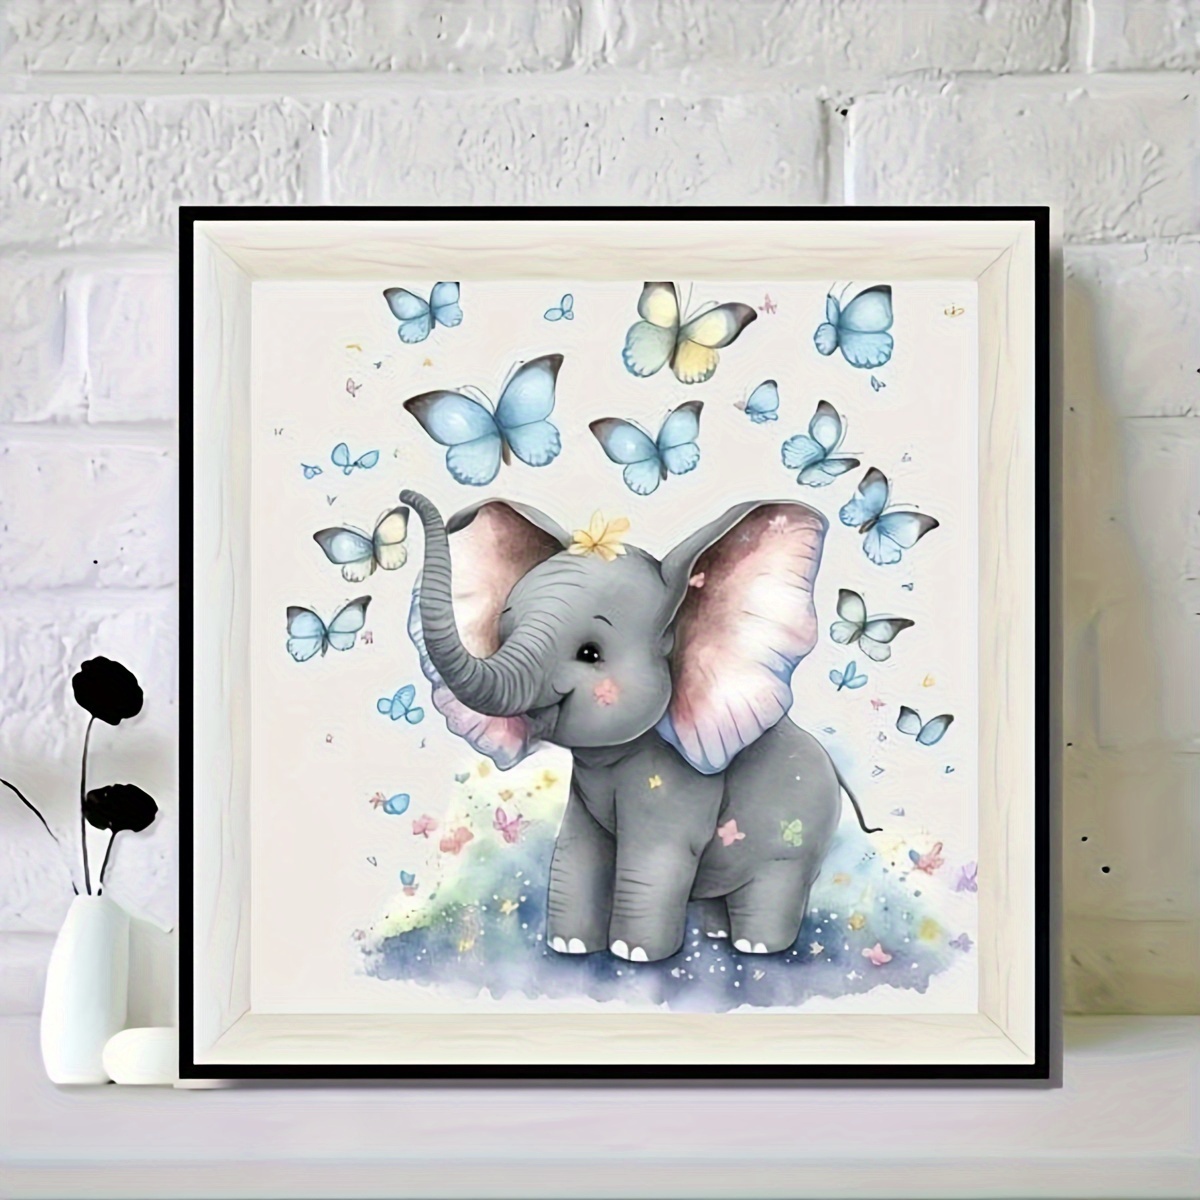 Cute Butterfly Elephant Full Round Artificial Diamond Painting Kits 5D Art  Embroidery Cross Stitch Painting Diamond Painting Art 1pc 20*20cm/7.87inx7.